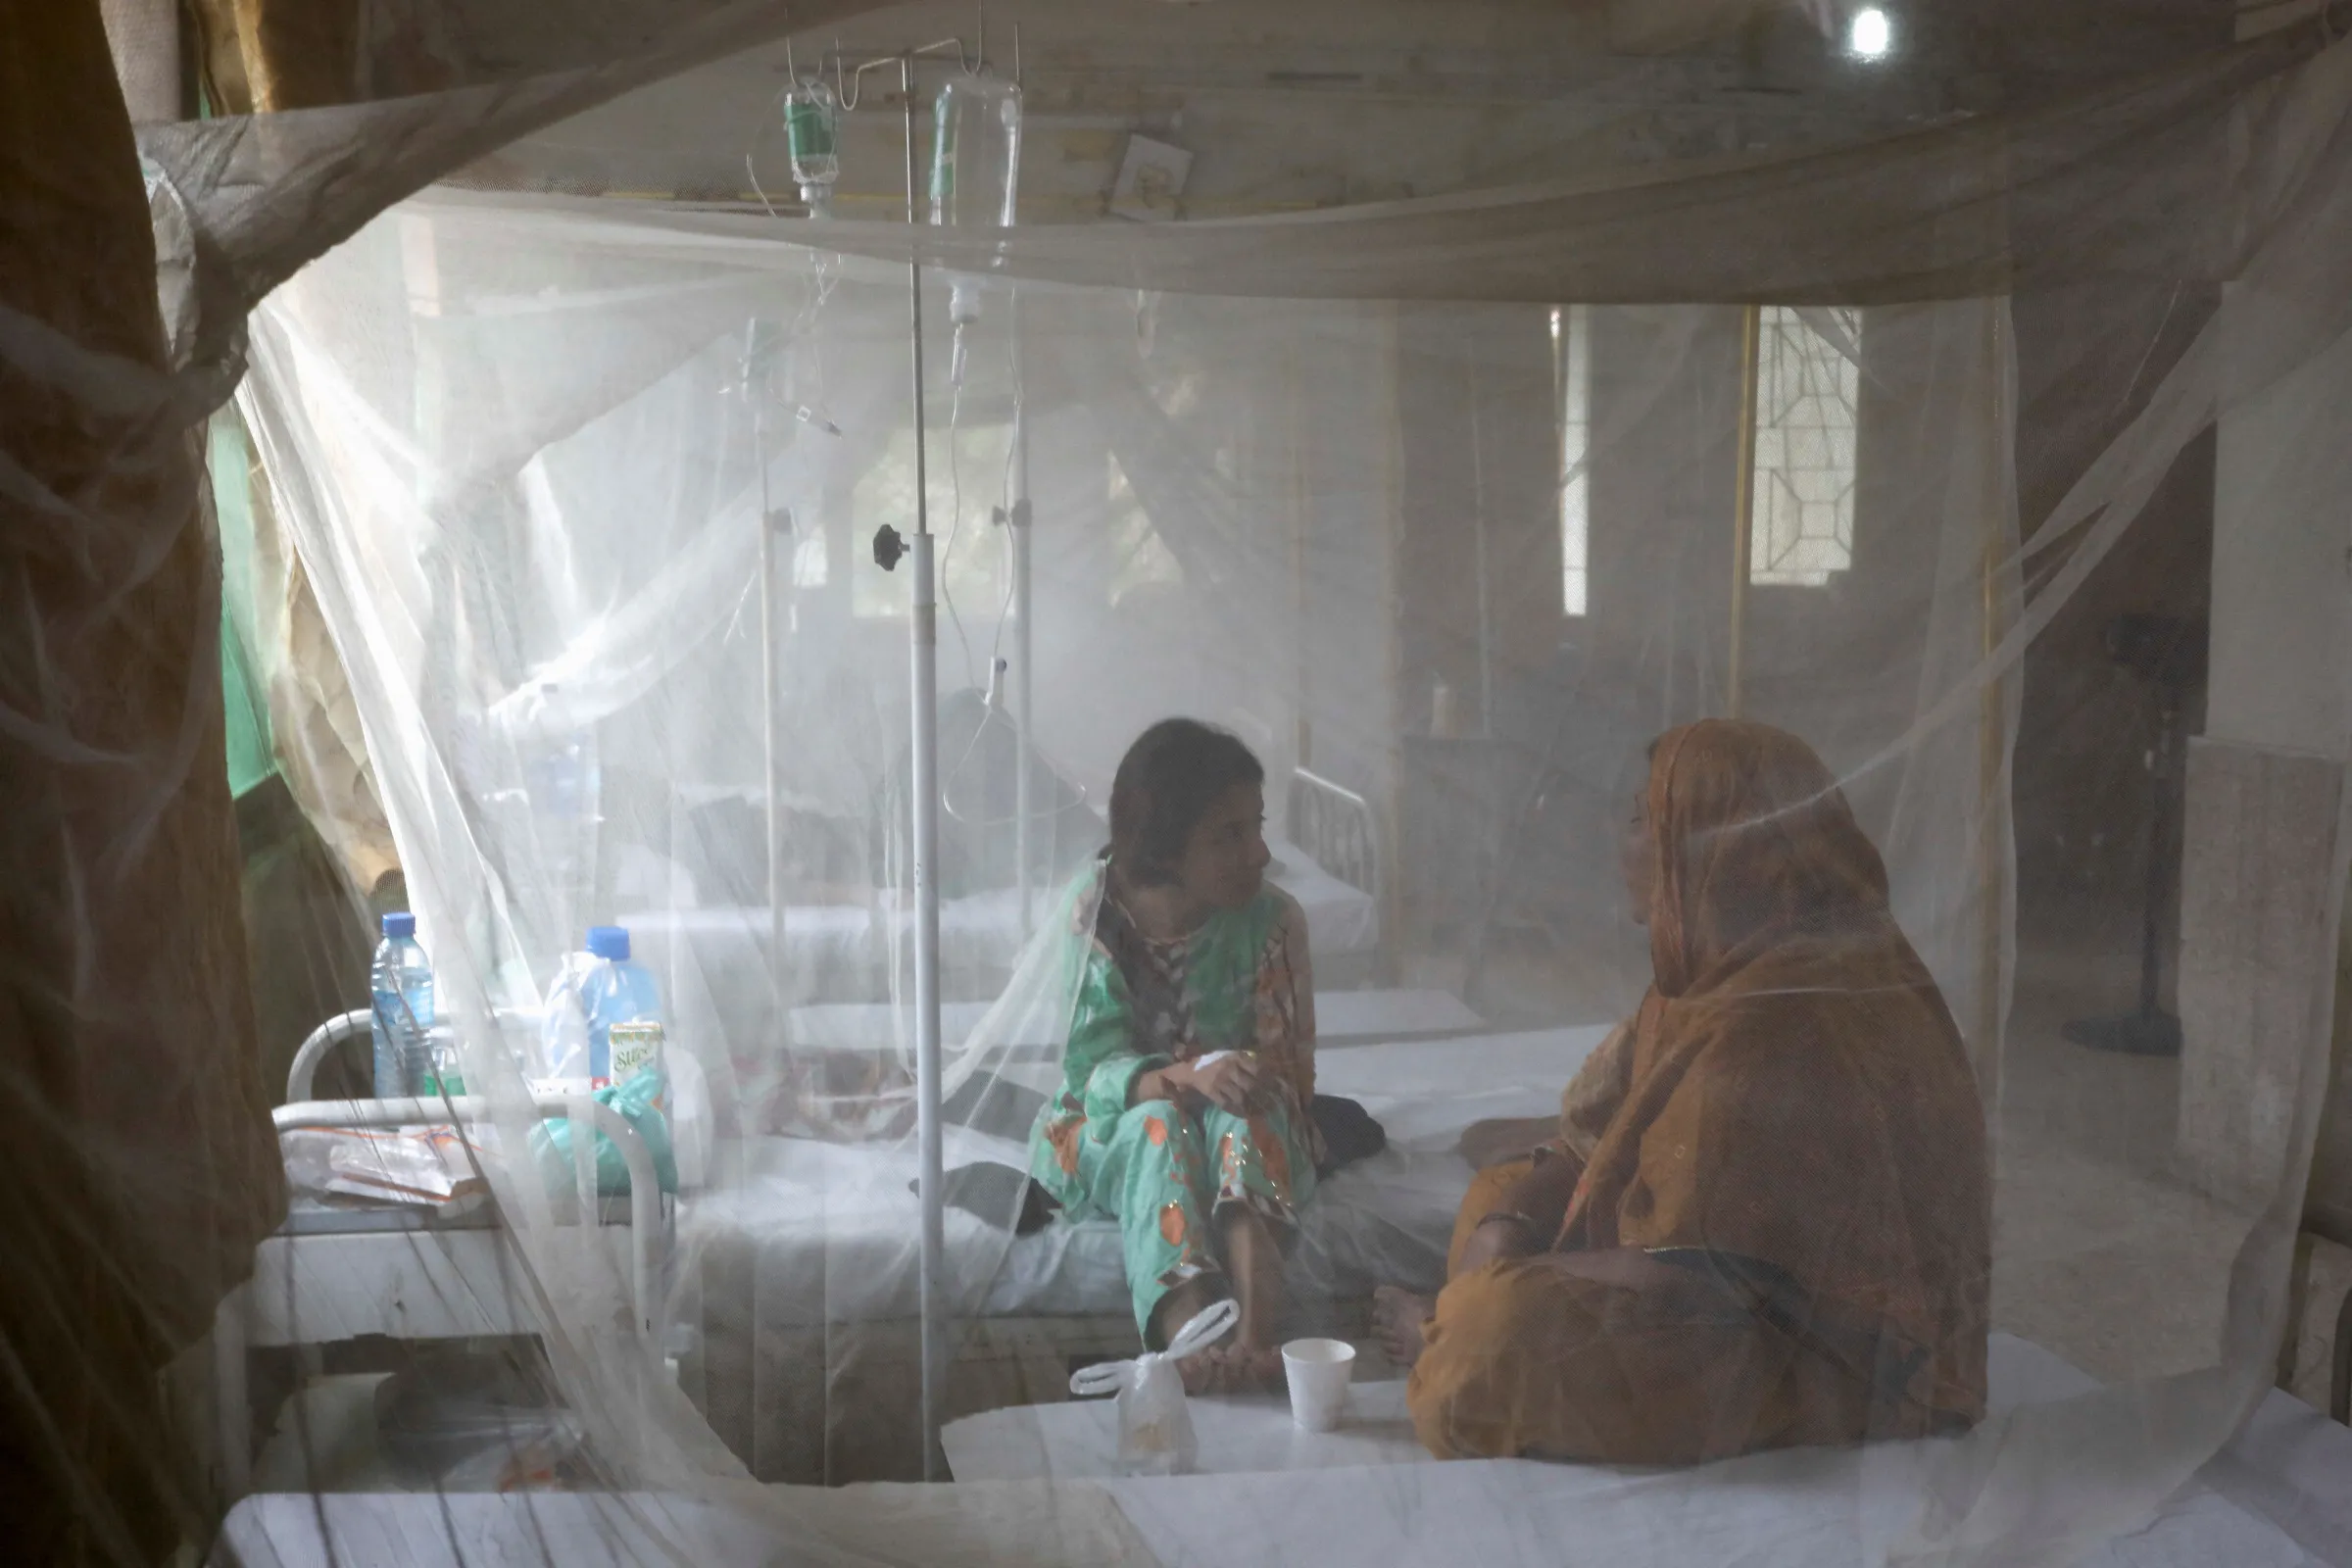 A patient suffering from dengue fever chats with a woman while sitting under a mosquito net inside a dengue and malaria ward at the Sindh Government Services Hospital in Karachi, Pakistan September 21, 2022